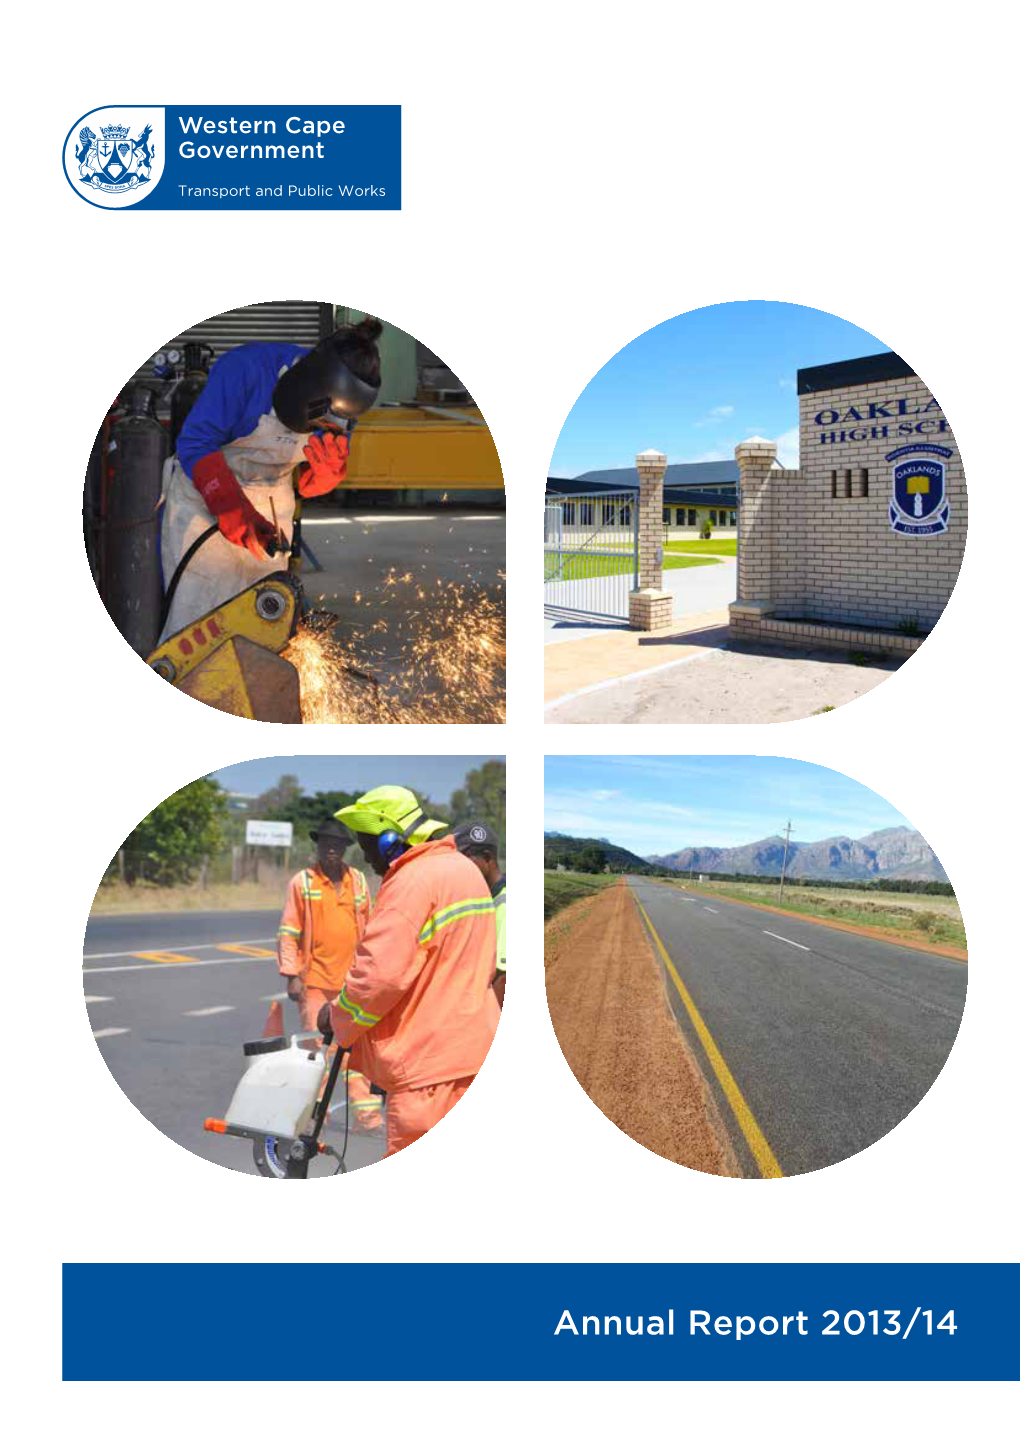 Department of Transport and Public Works: Annual Report 2013/2014